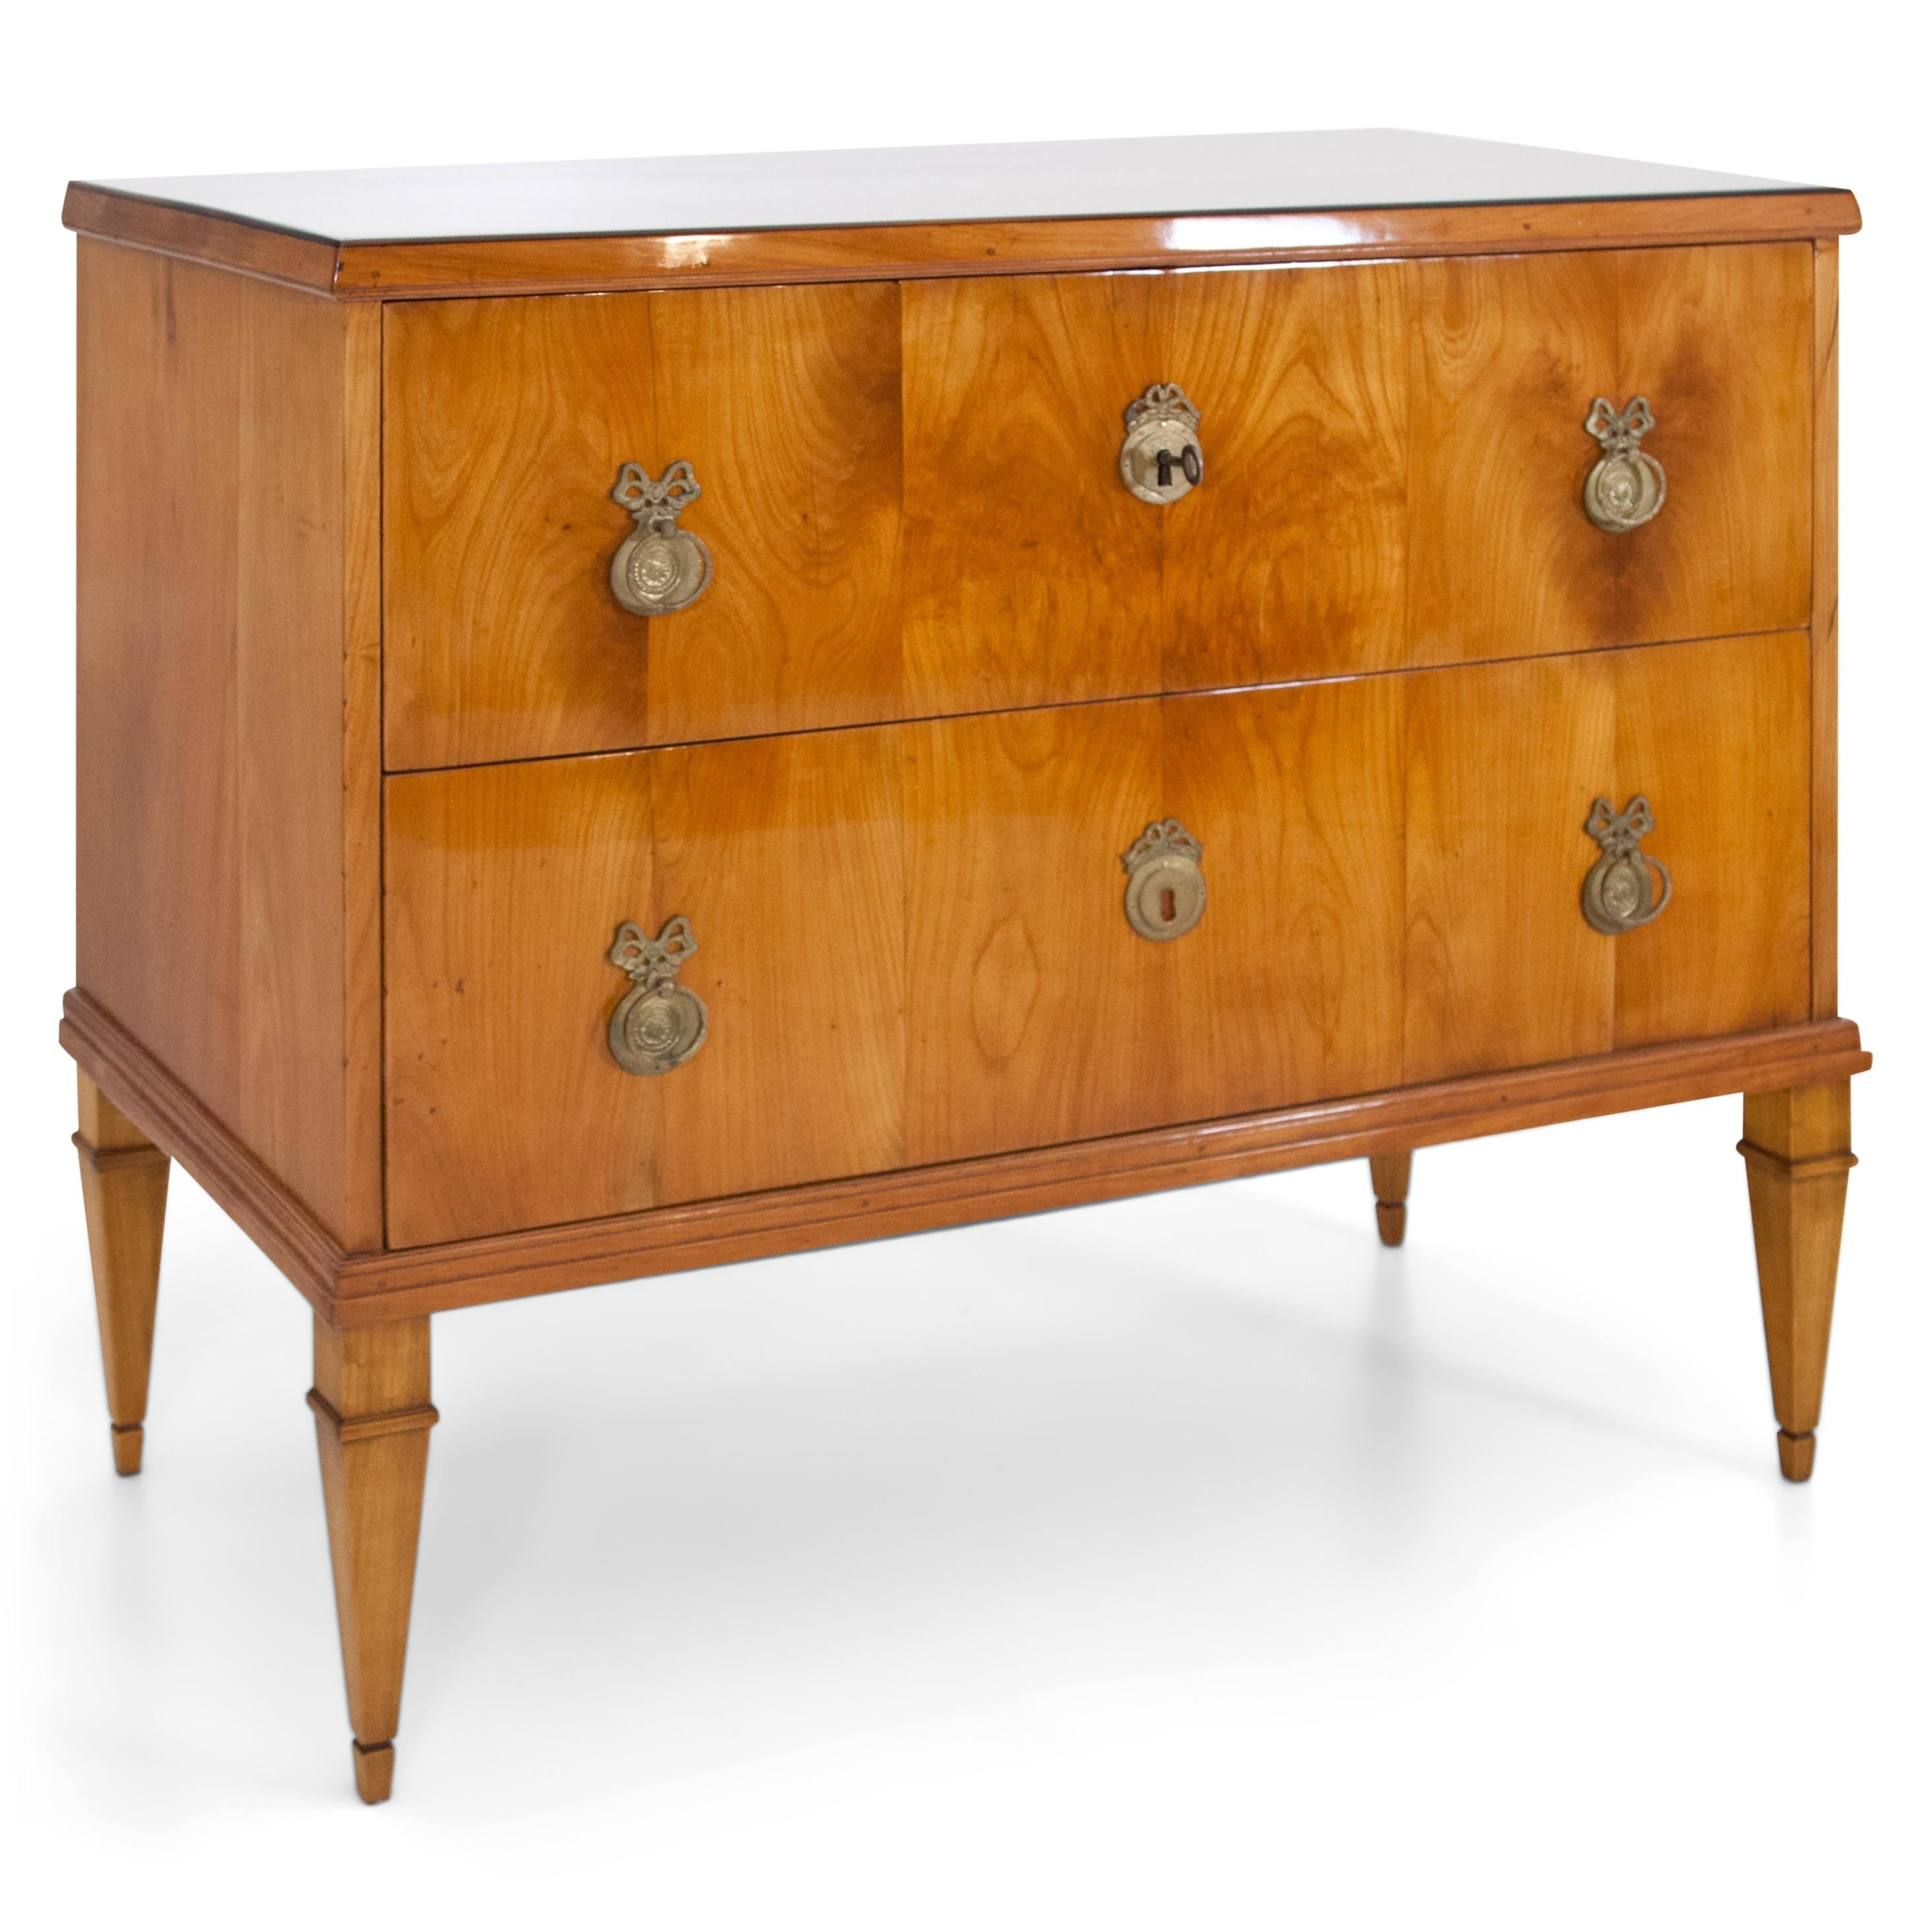 Two-drawered chest of drawers standing on square-pointed feet with profiled lower rail and bronze fittings with pull rings and ribbon decoration. Cherry veneered. The feet are recent. The chest of drawers has been restored and hand polished.
 